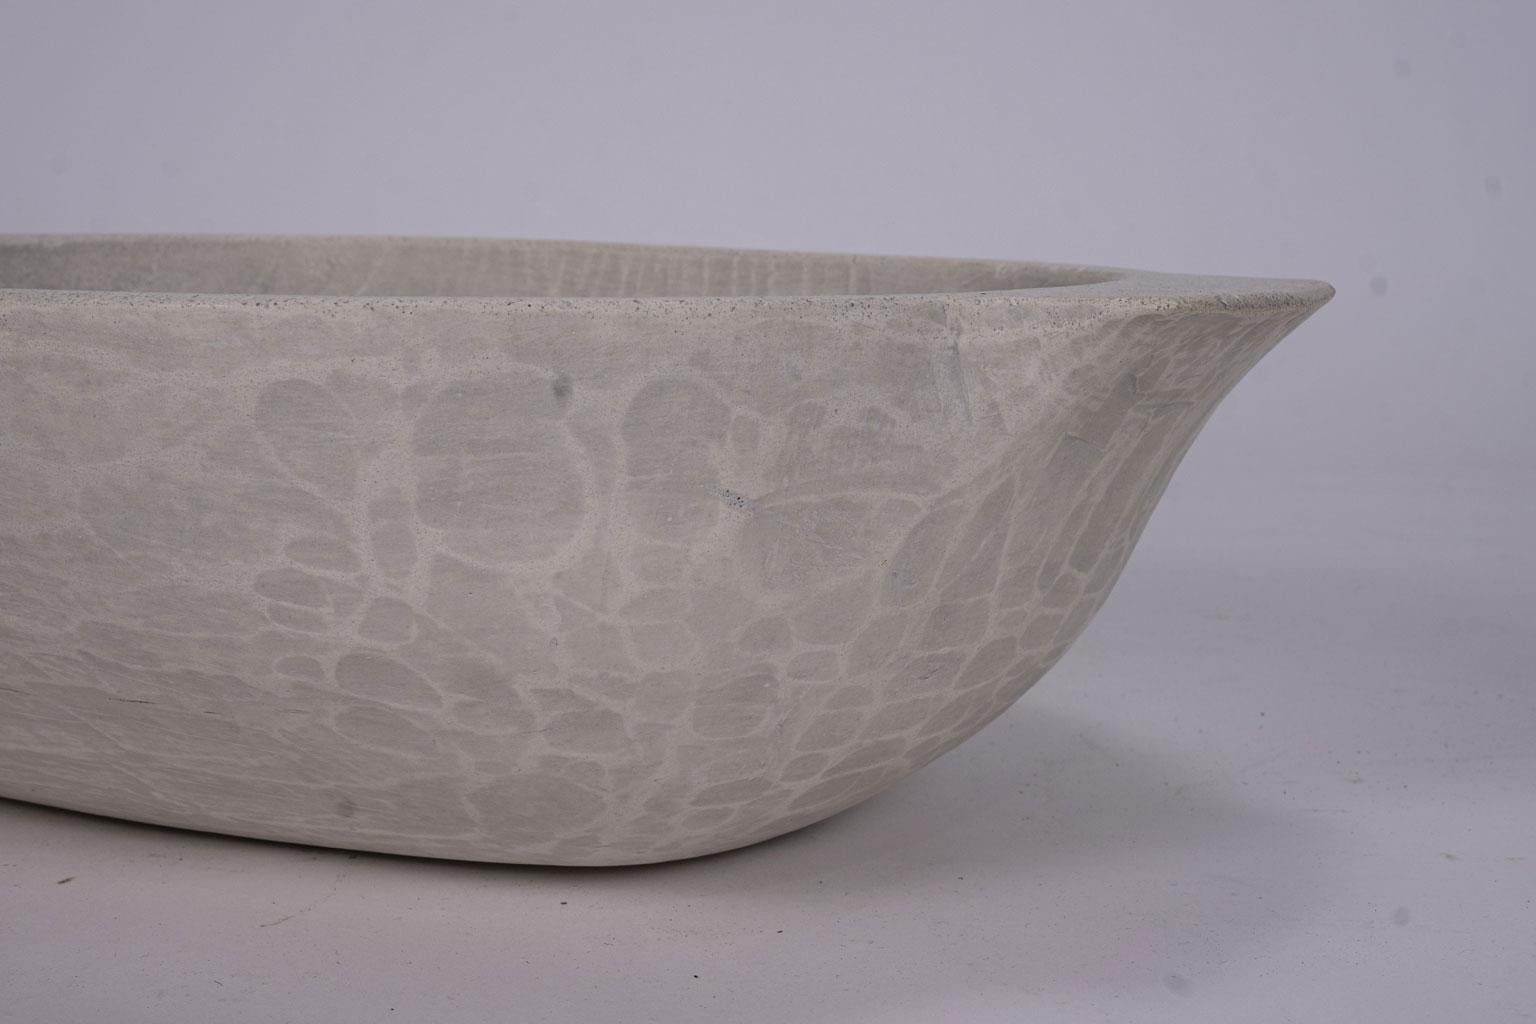 Contemporary Artisan Oolitic Limestone Bowl In Good Condition For Sale In Houston, TX